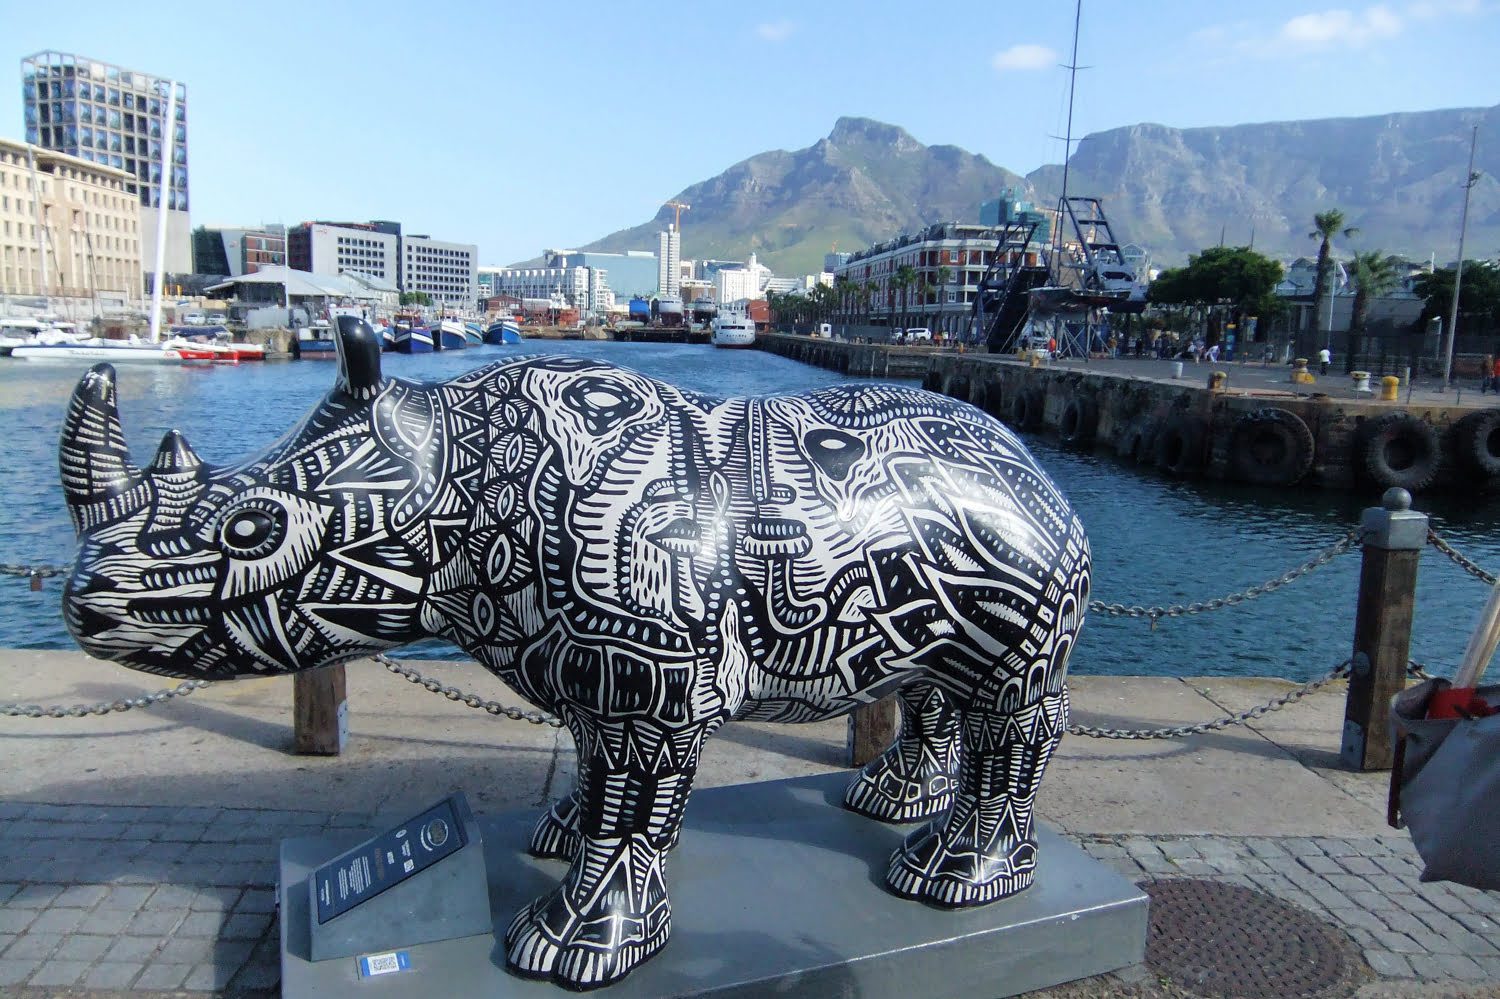 V&A Waterfront, Cape Town: A Local's Guide